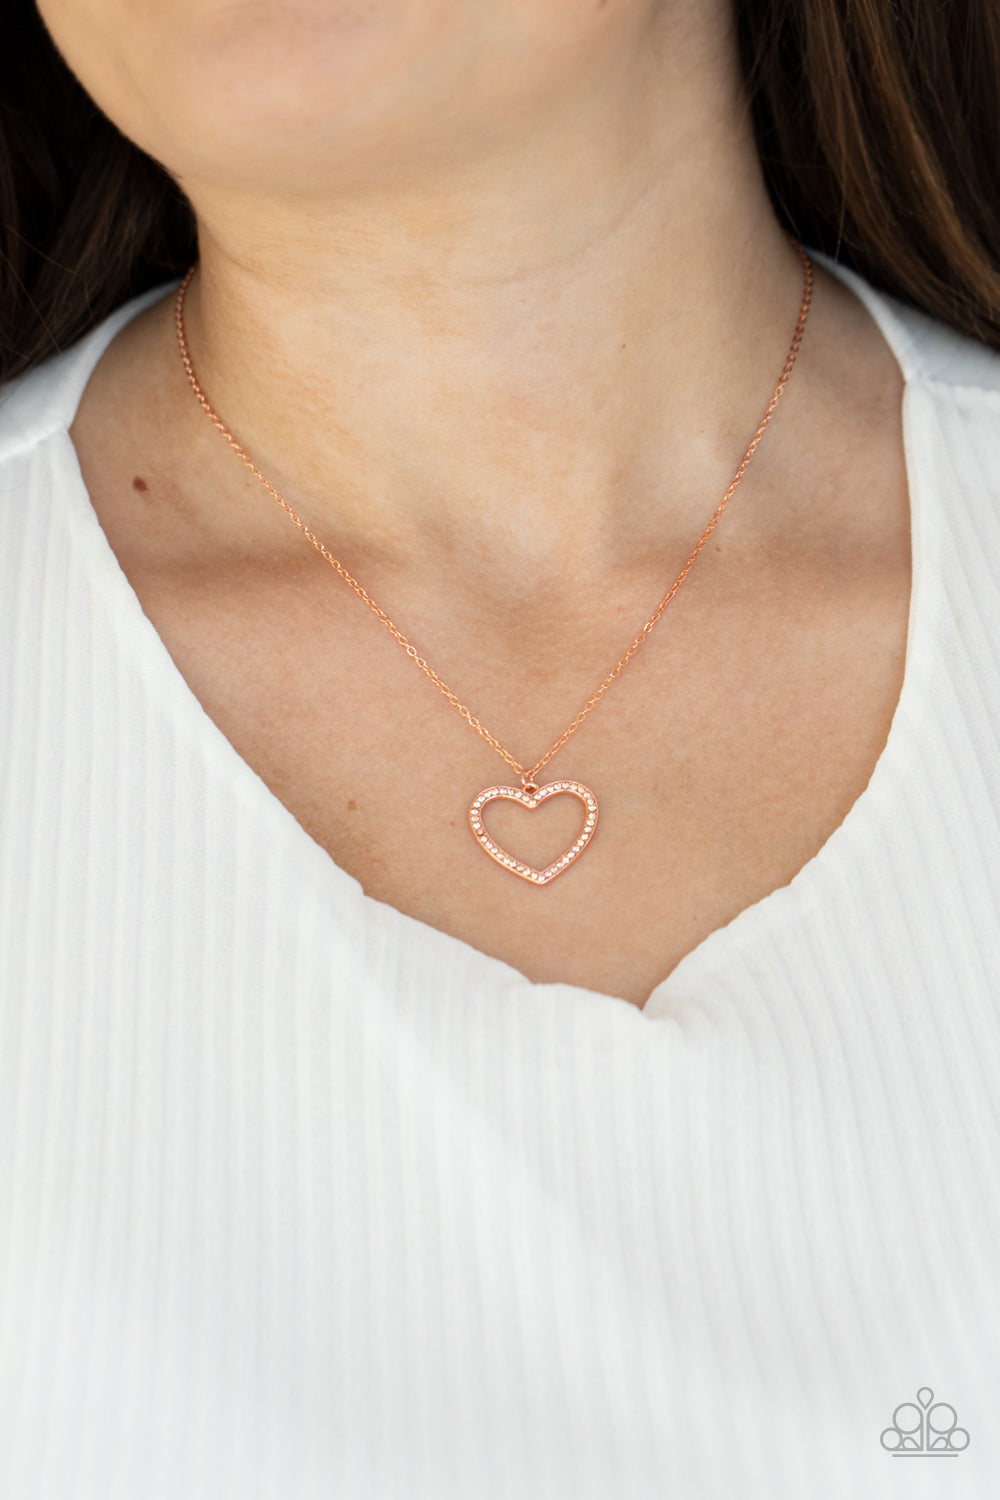 GLOW by Heart Copper Necklace